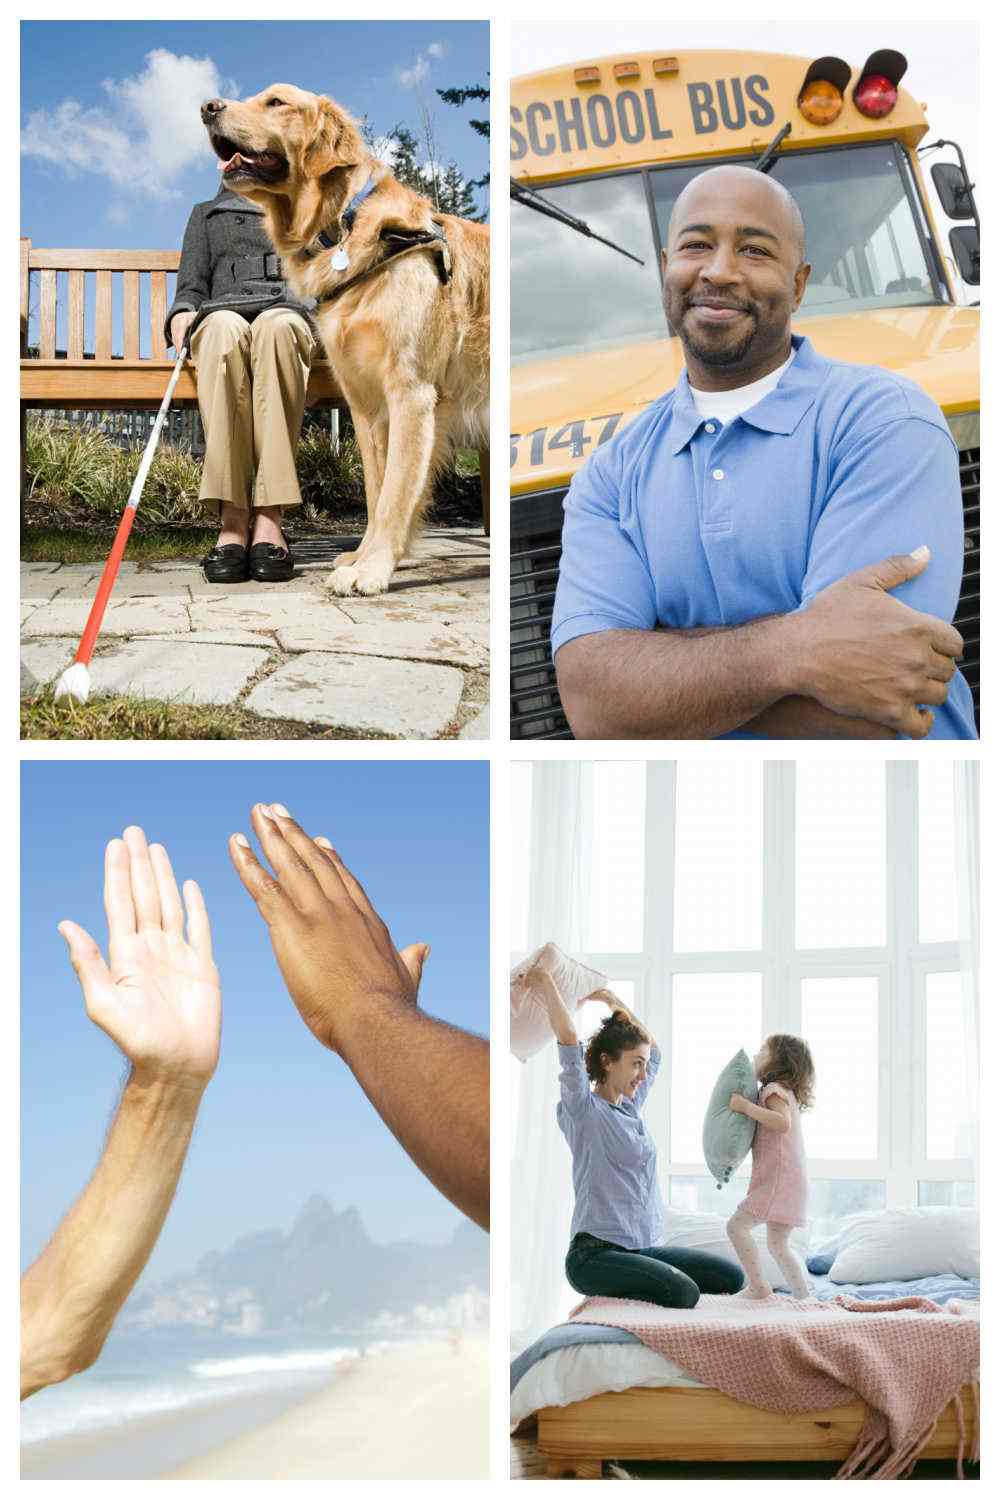 High five, pillow fight, school bus driver, and guide dog photos in a collage.